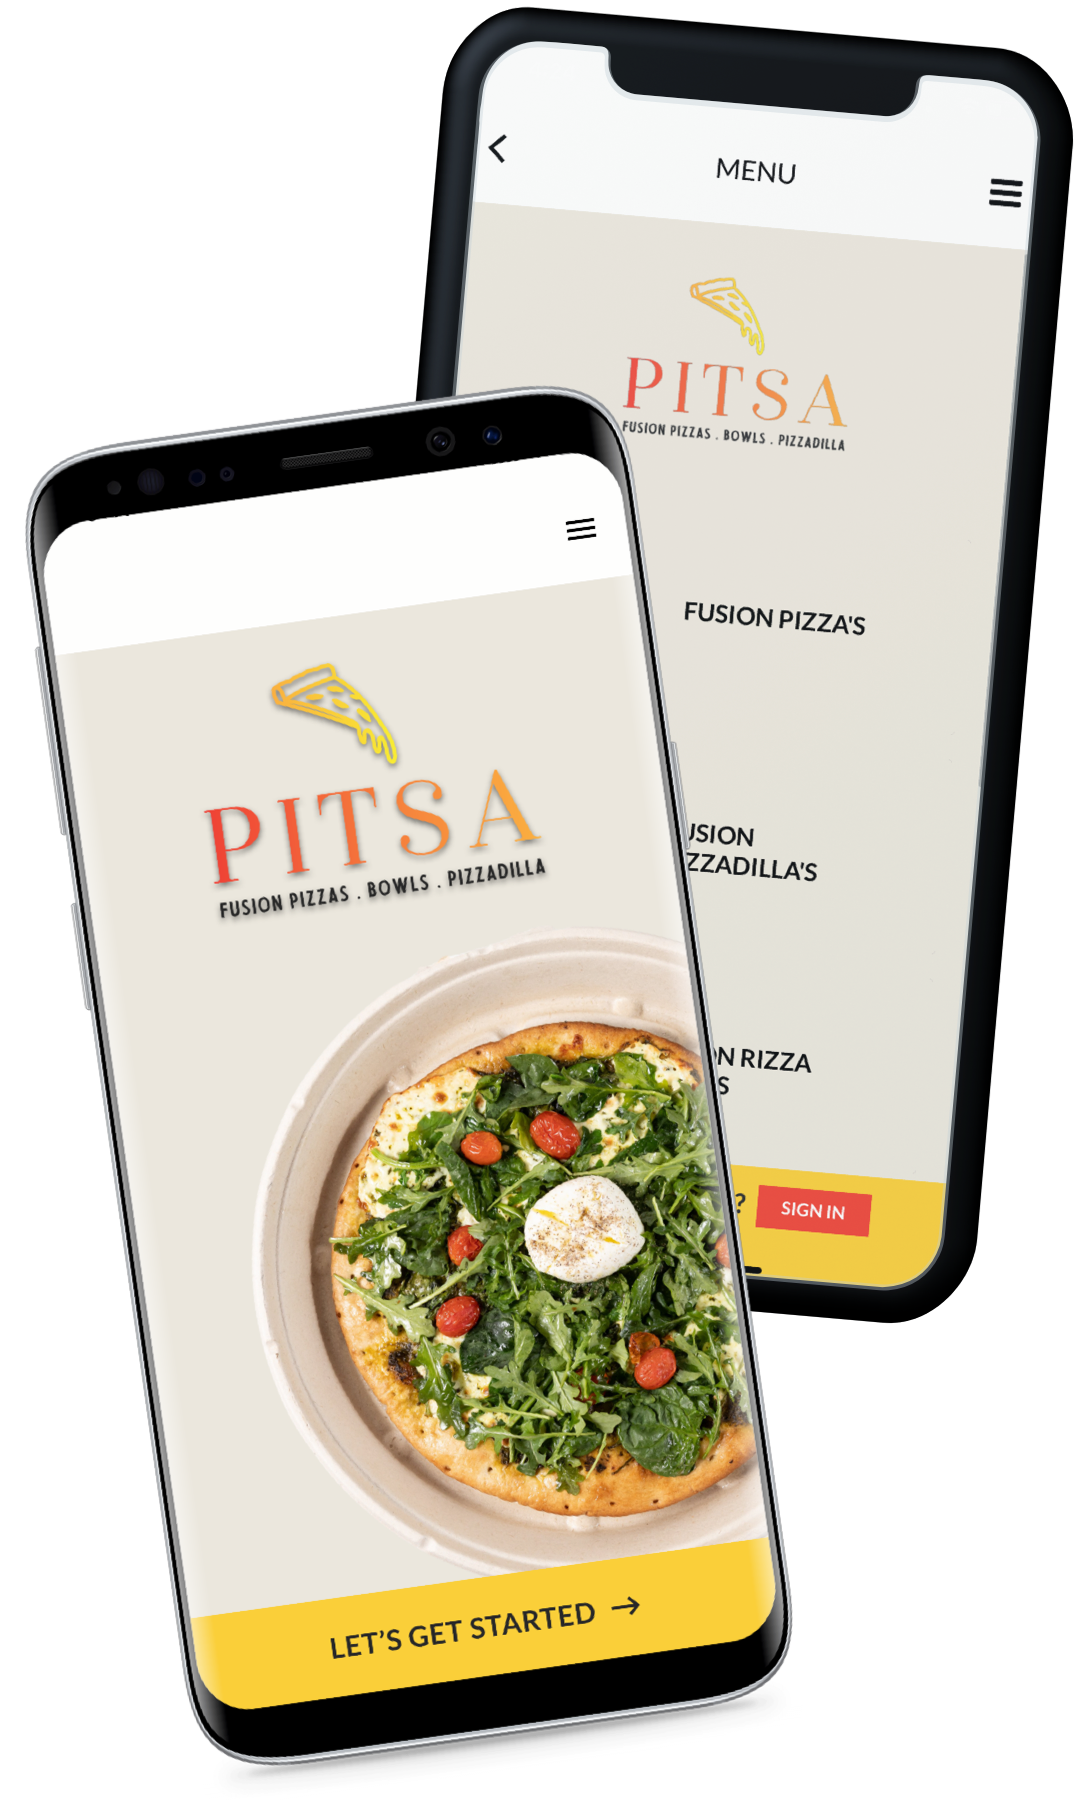 The Pitsa app shown on two iPhones